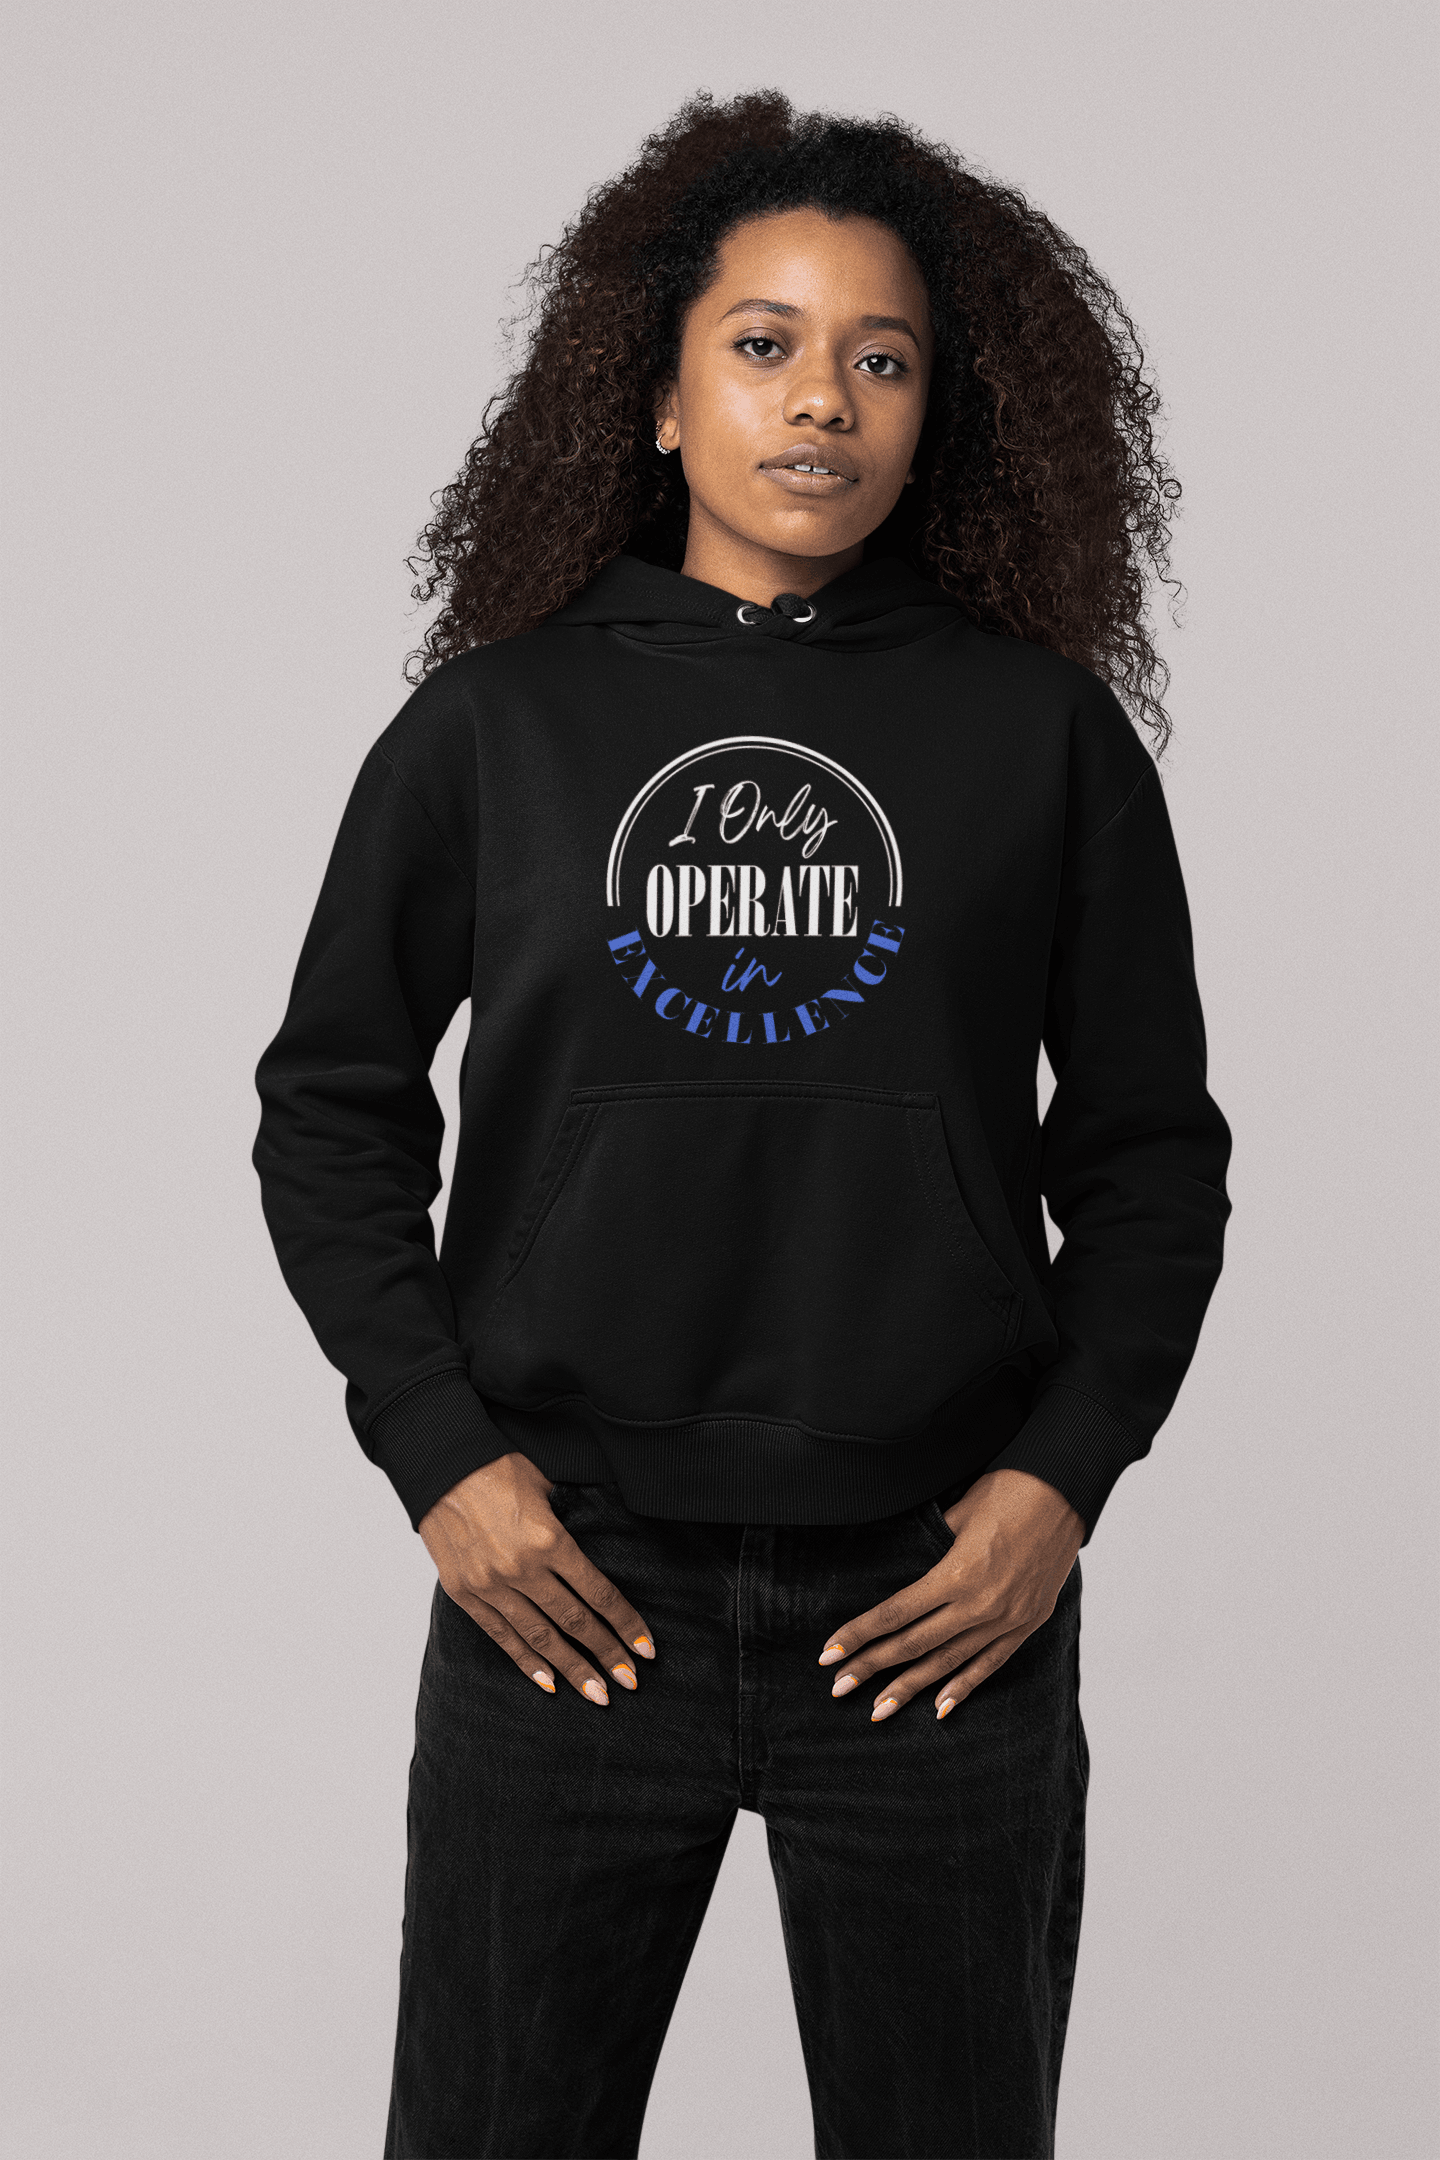 I Only Operate in Excellence Hoodie - Women Empowerment T-Shirts & Apparel | CP Designs Unlimited